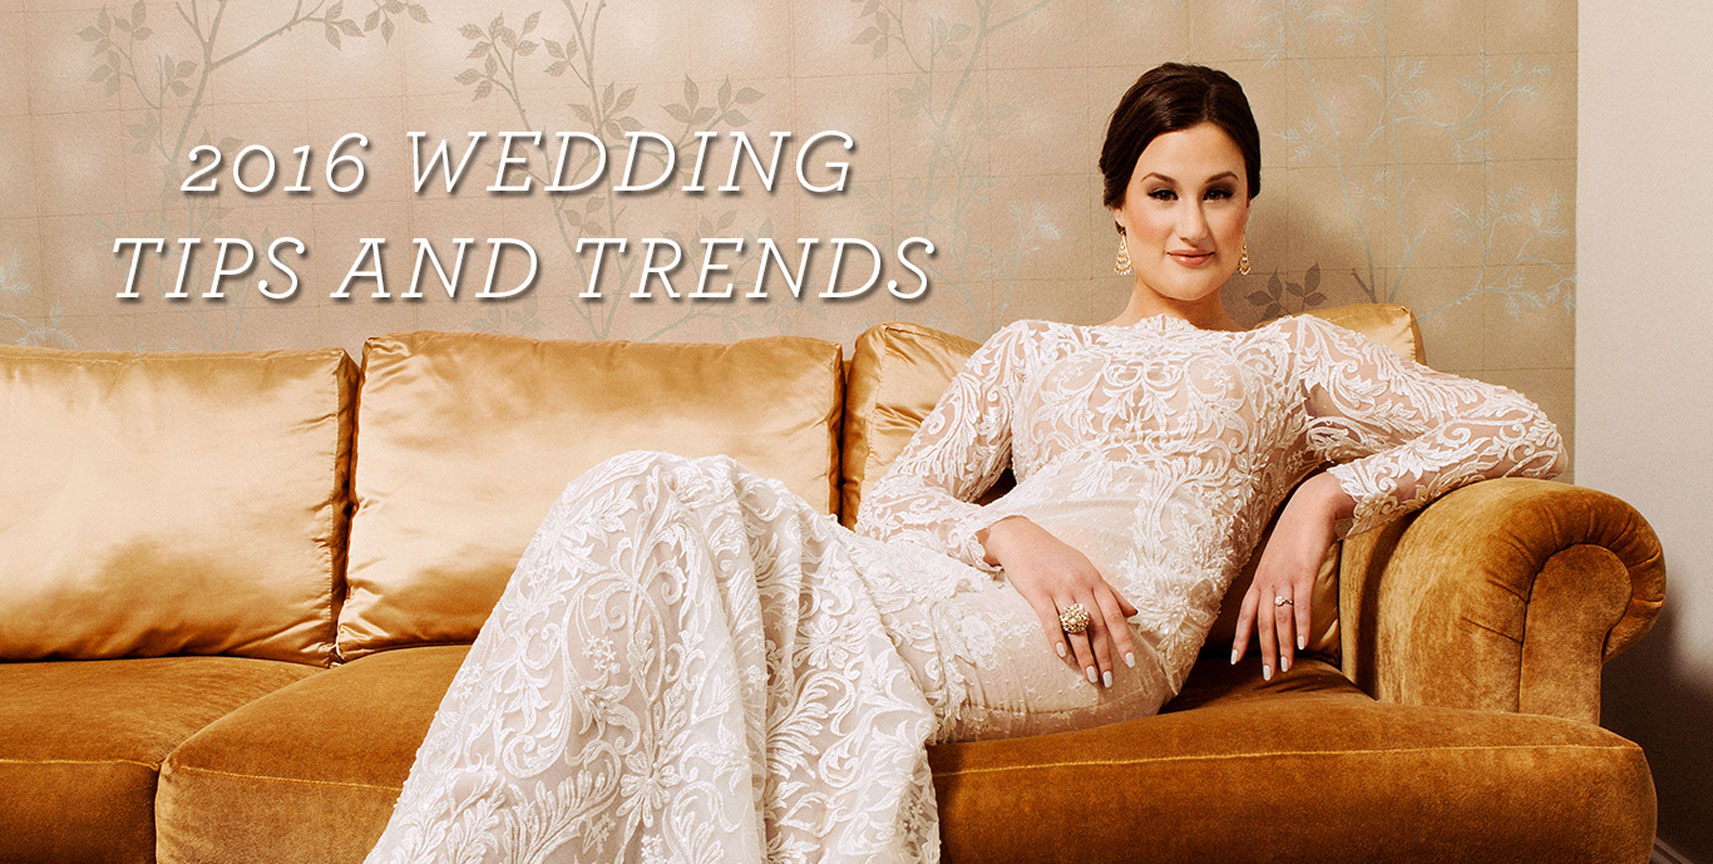 2016 Wedding Tips and Trends